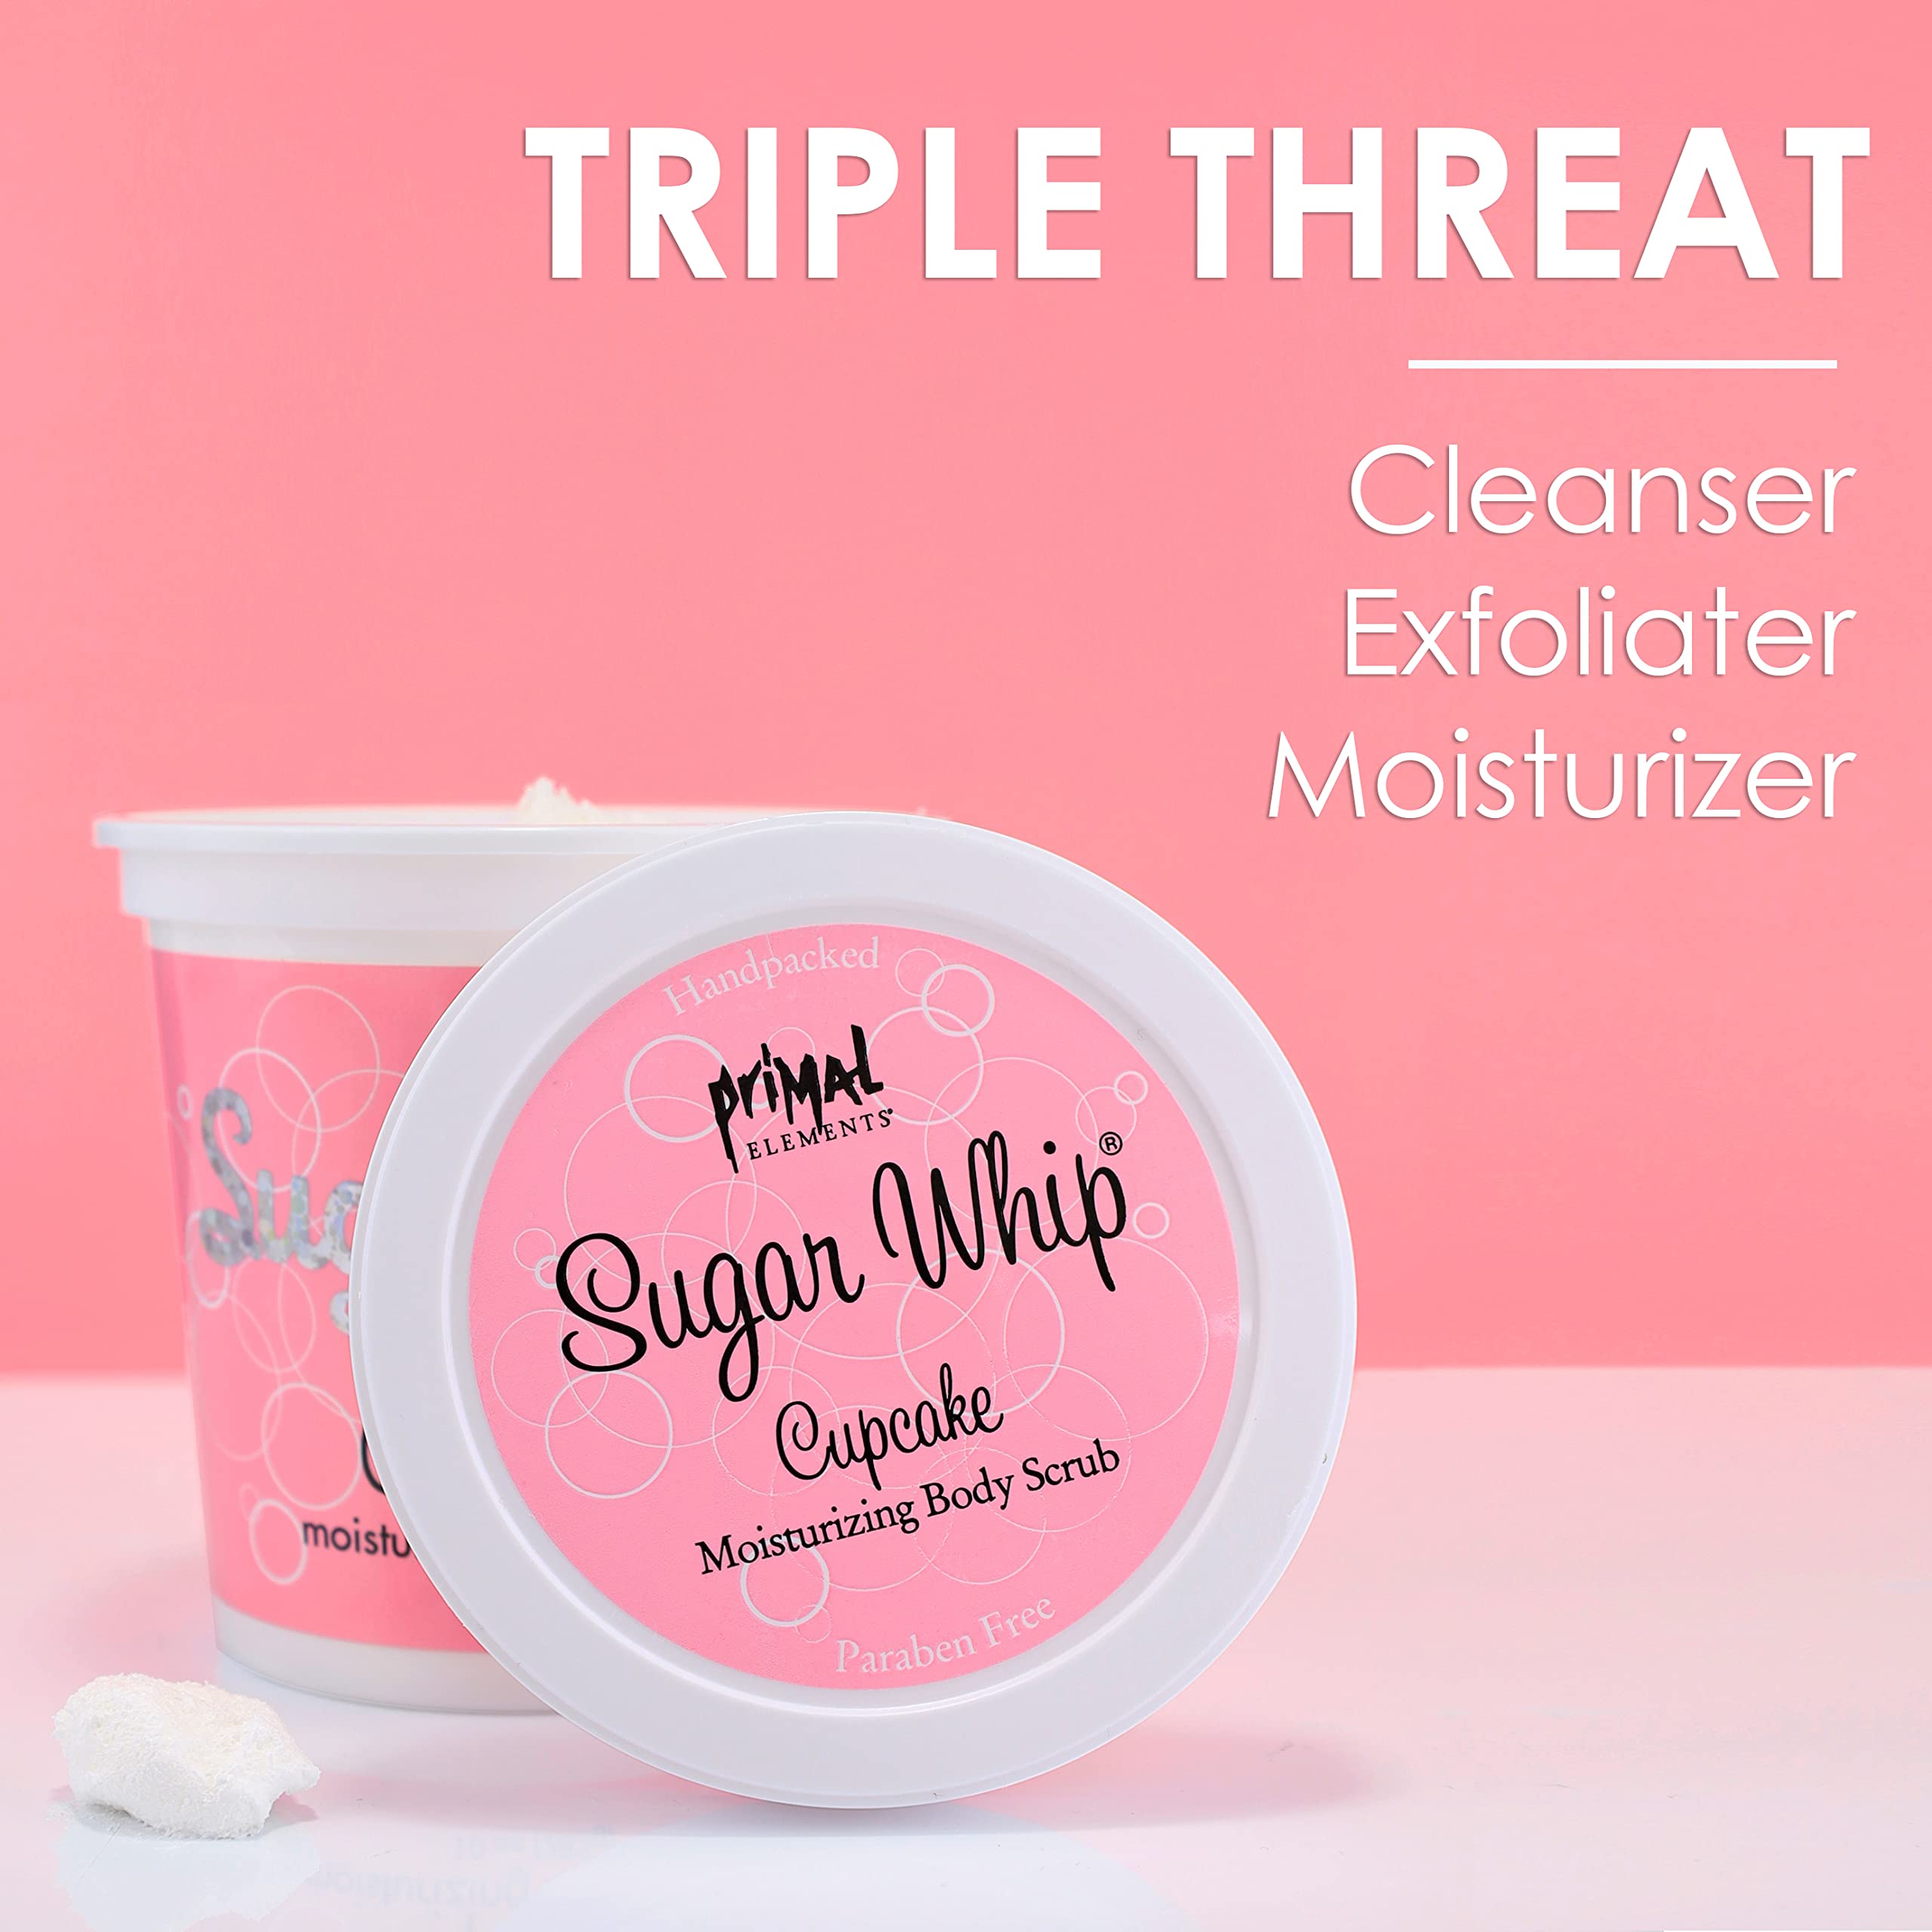 Primal Elements Sugar Whip Exfoliating Scrub, Body and Face Cleanser for Silky Smooth, Moisturize All Skin Types, 10 Oz, Cupcake, 10 Ounce